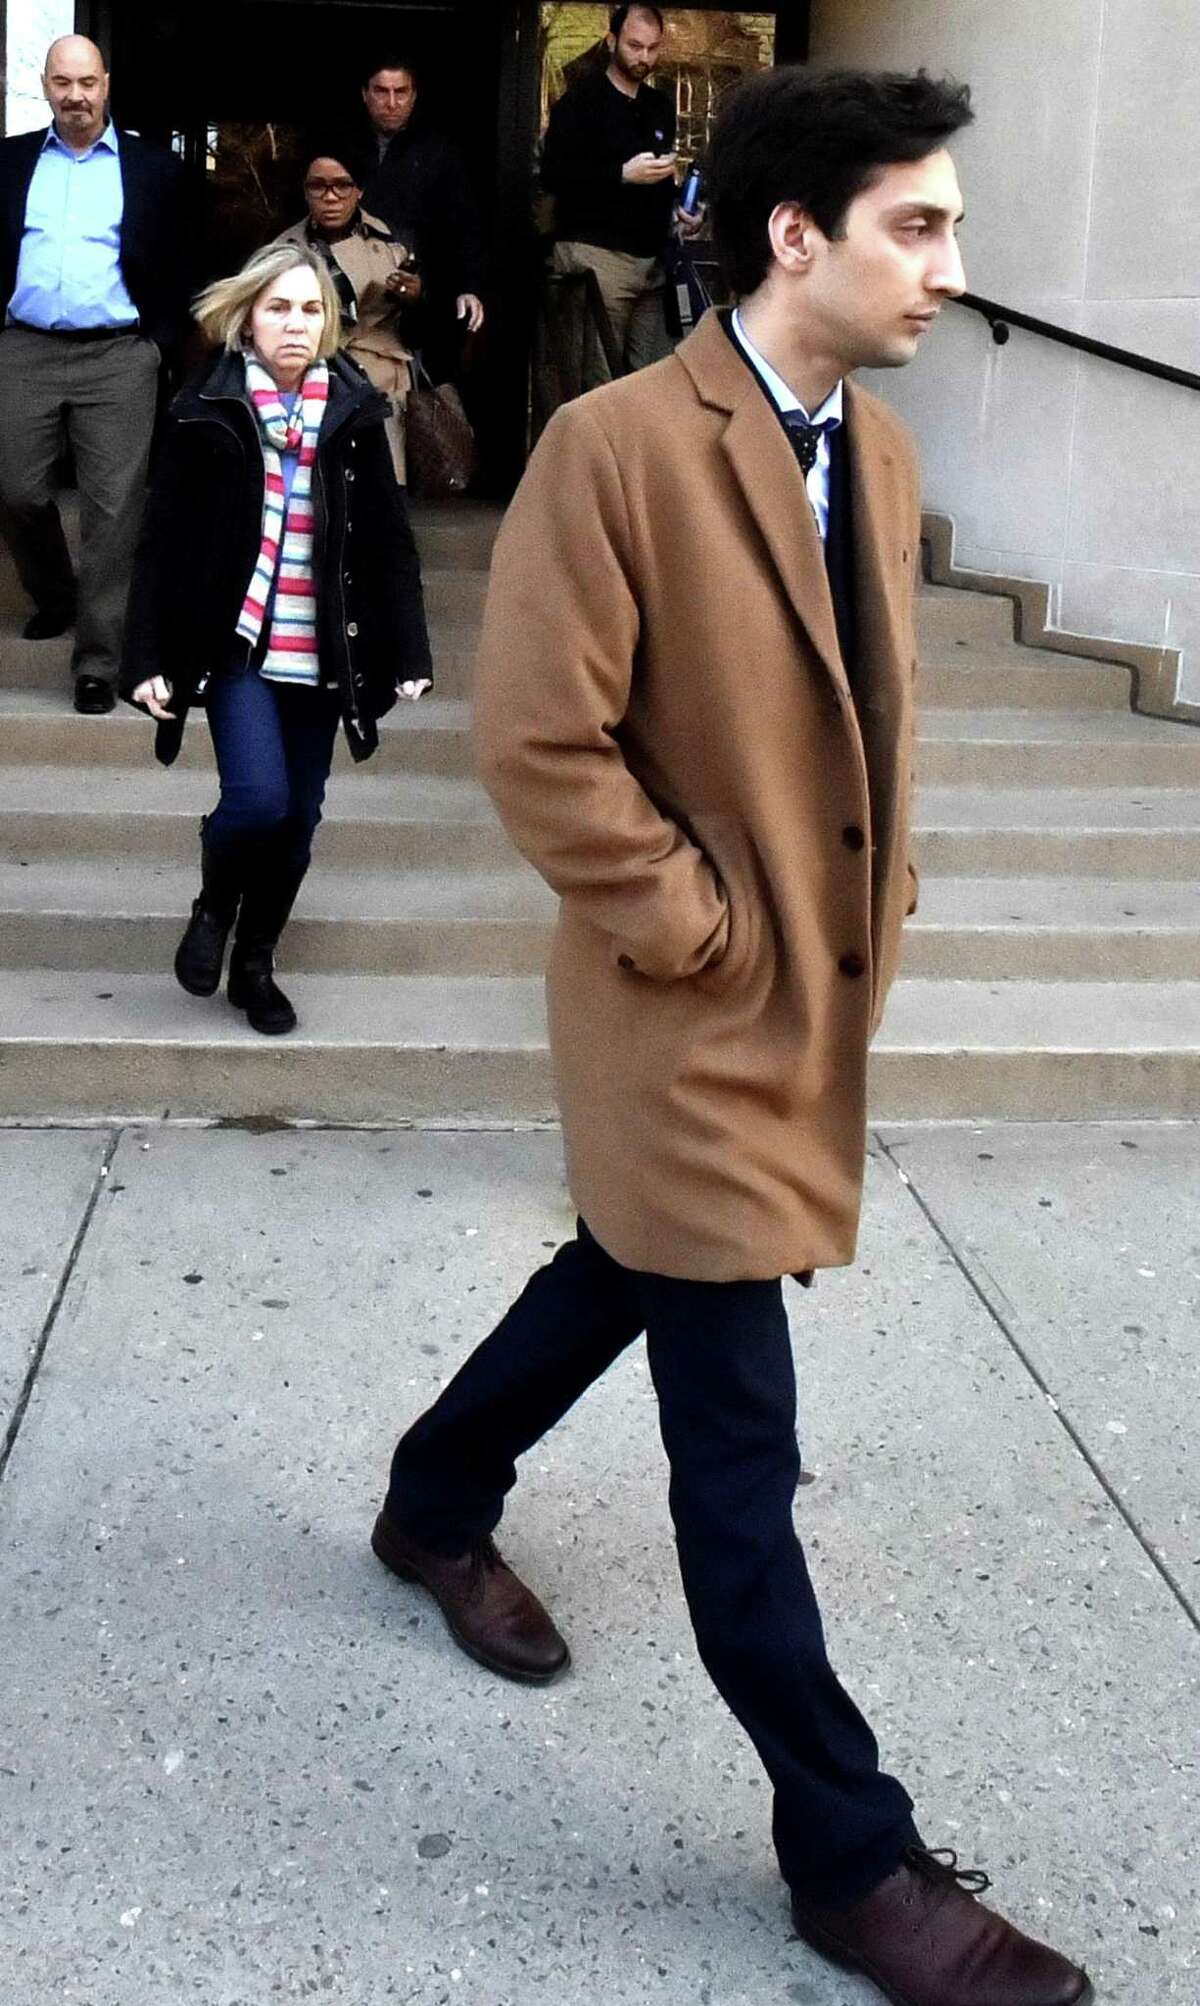 Saifullah Kahn, a former Yale student on trial for allegedly sexually assaulting a female classmate, leaves Superior Court in New Haven Tuesday .